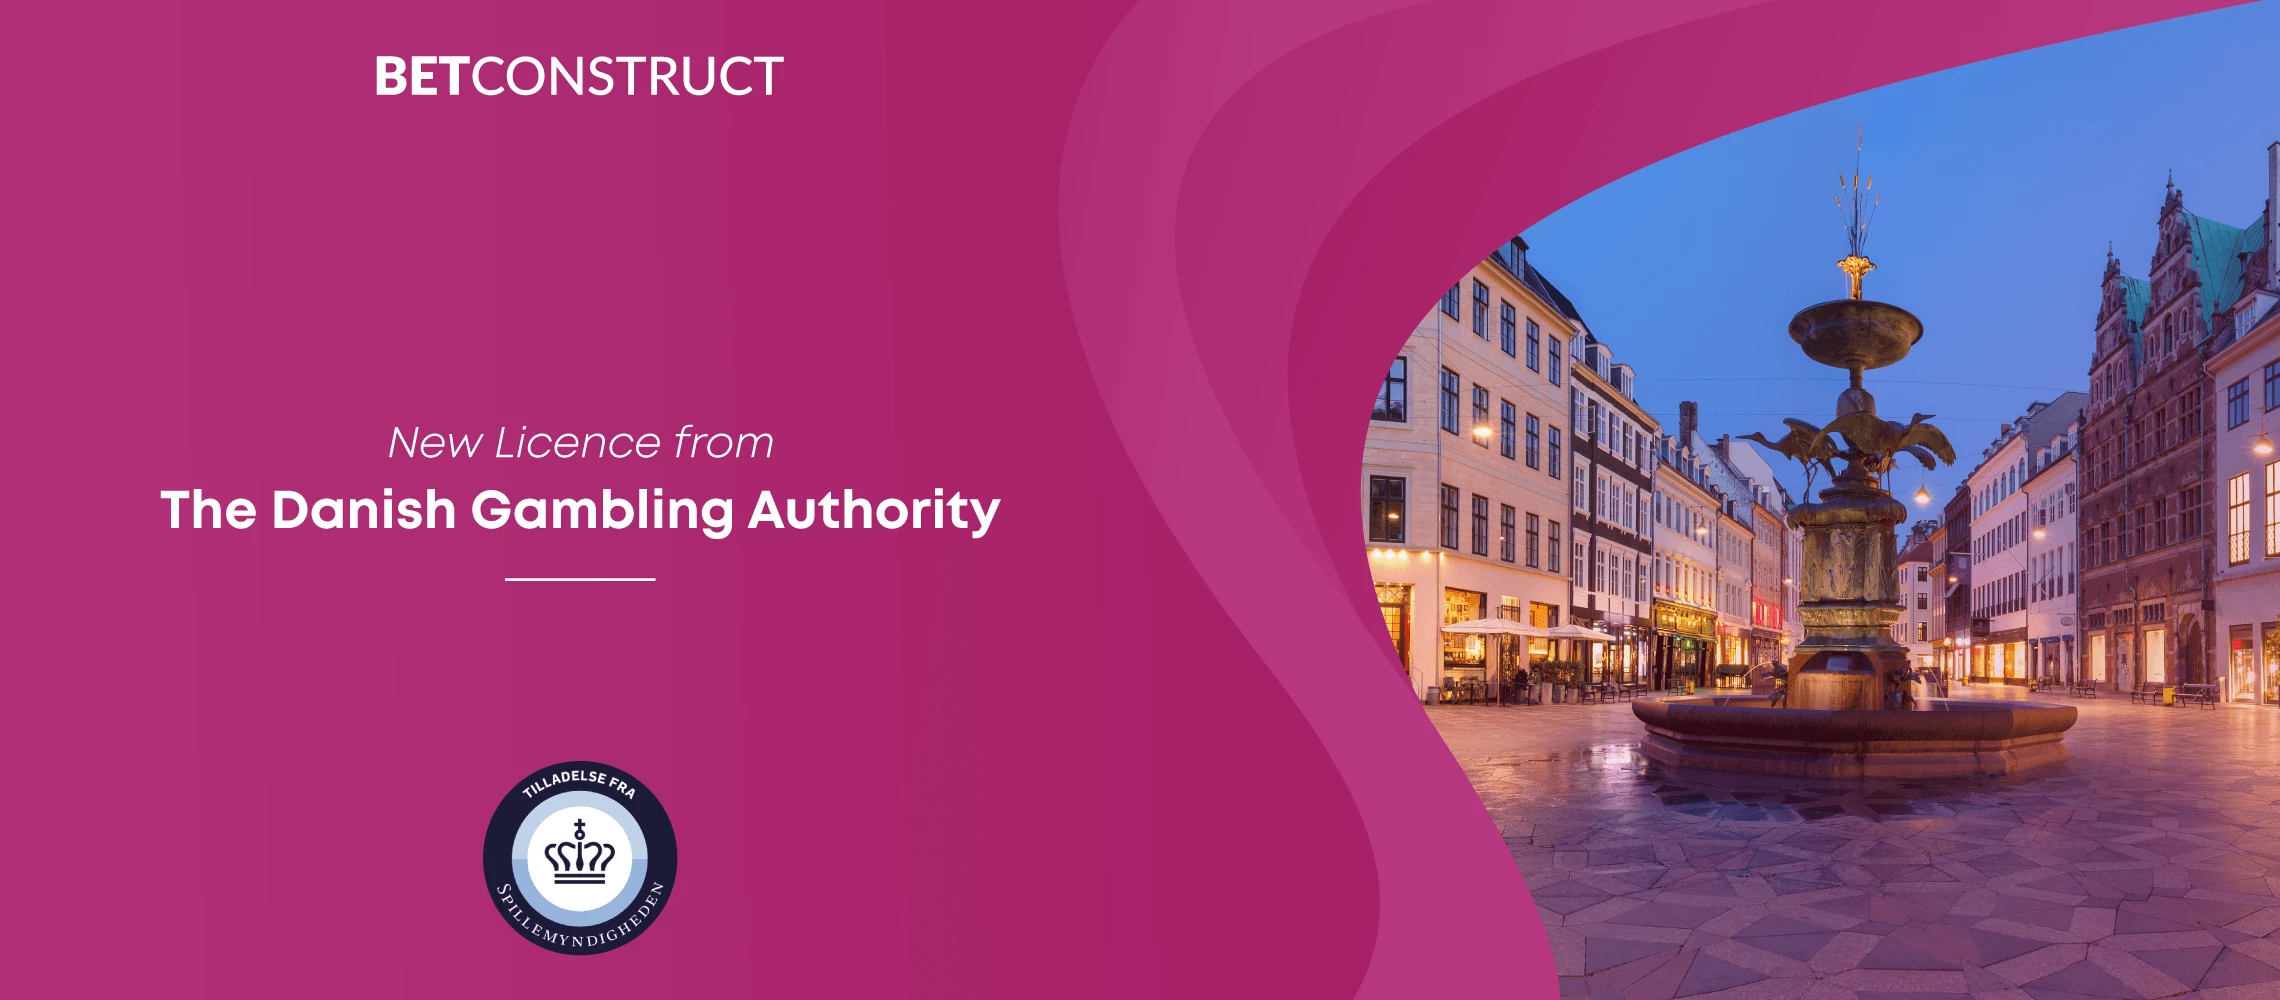 BetConstruct Obtains a New Licence from The Danish Gambling Authority